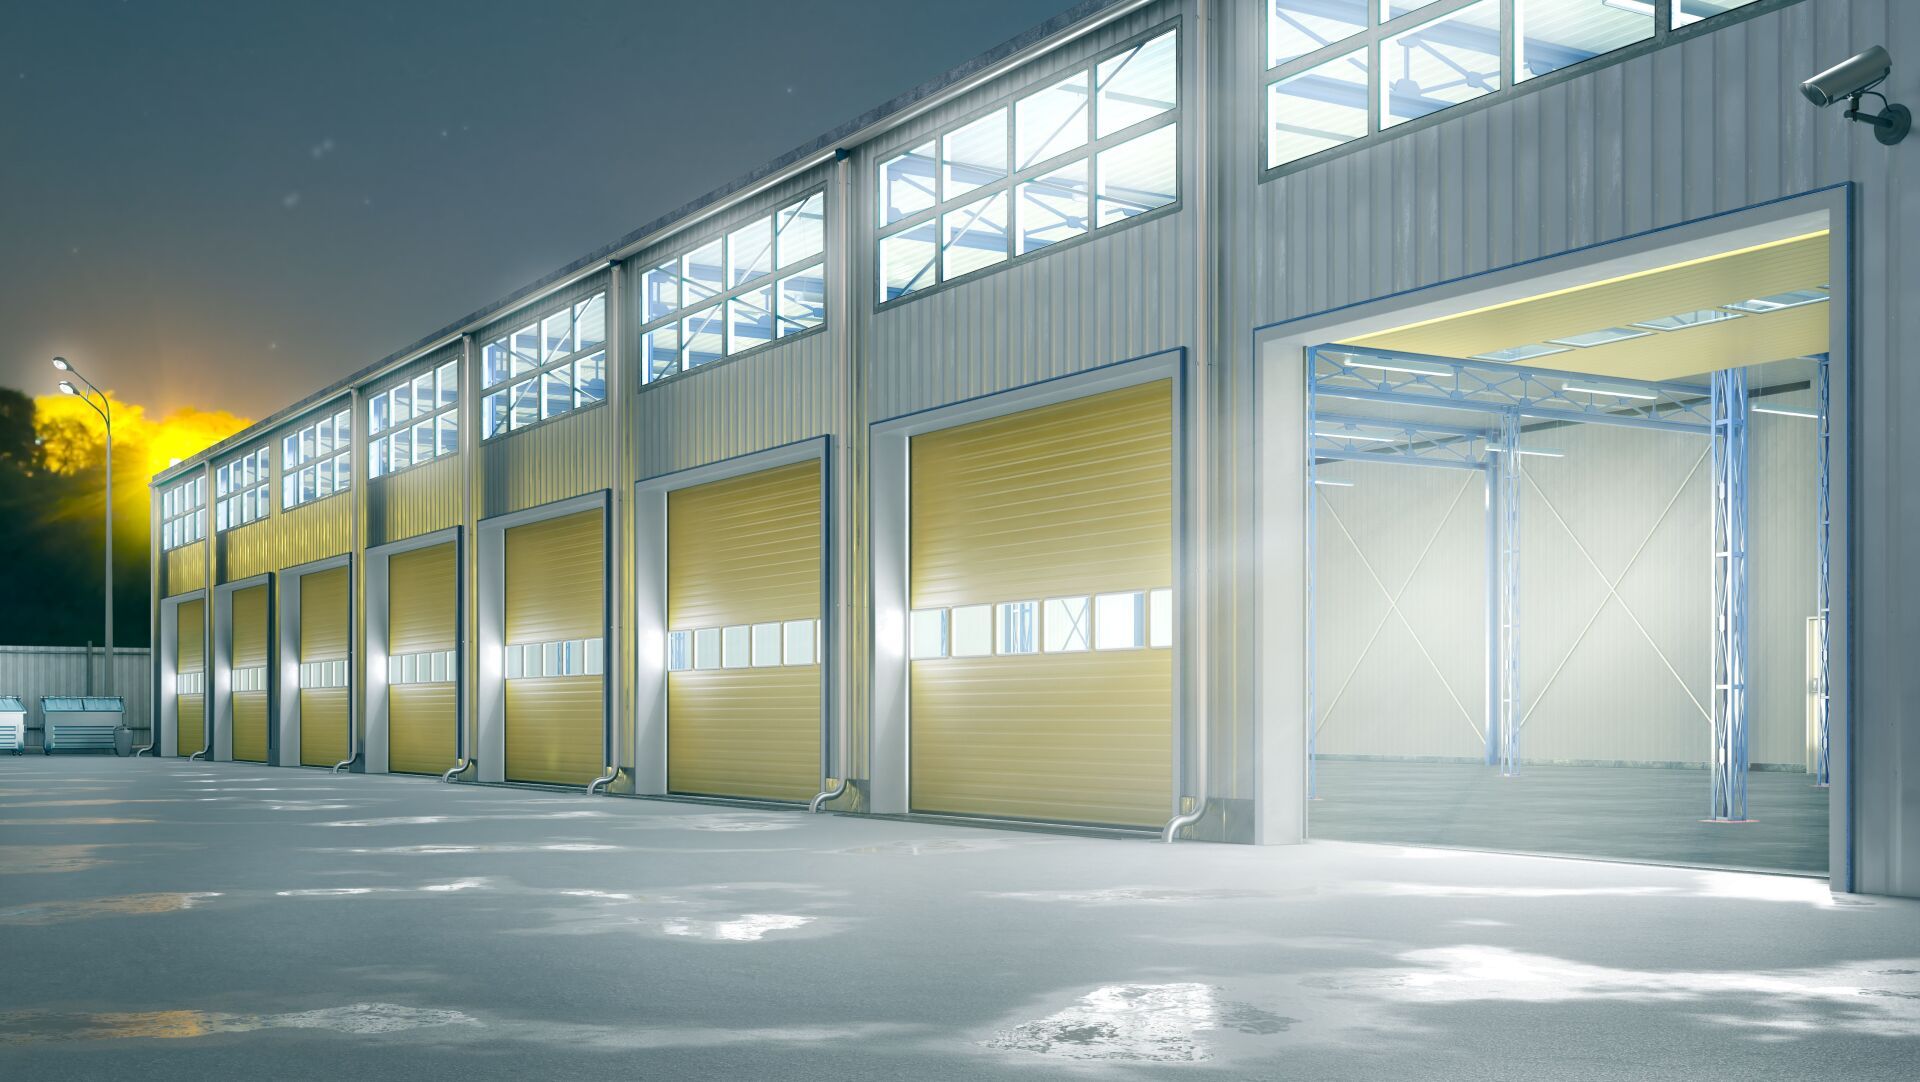 Industrial Door Company provides commercial doors for hospitals, offices, shopping malls and other retail buildings in and around Sacramento, California